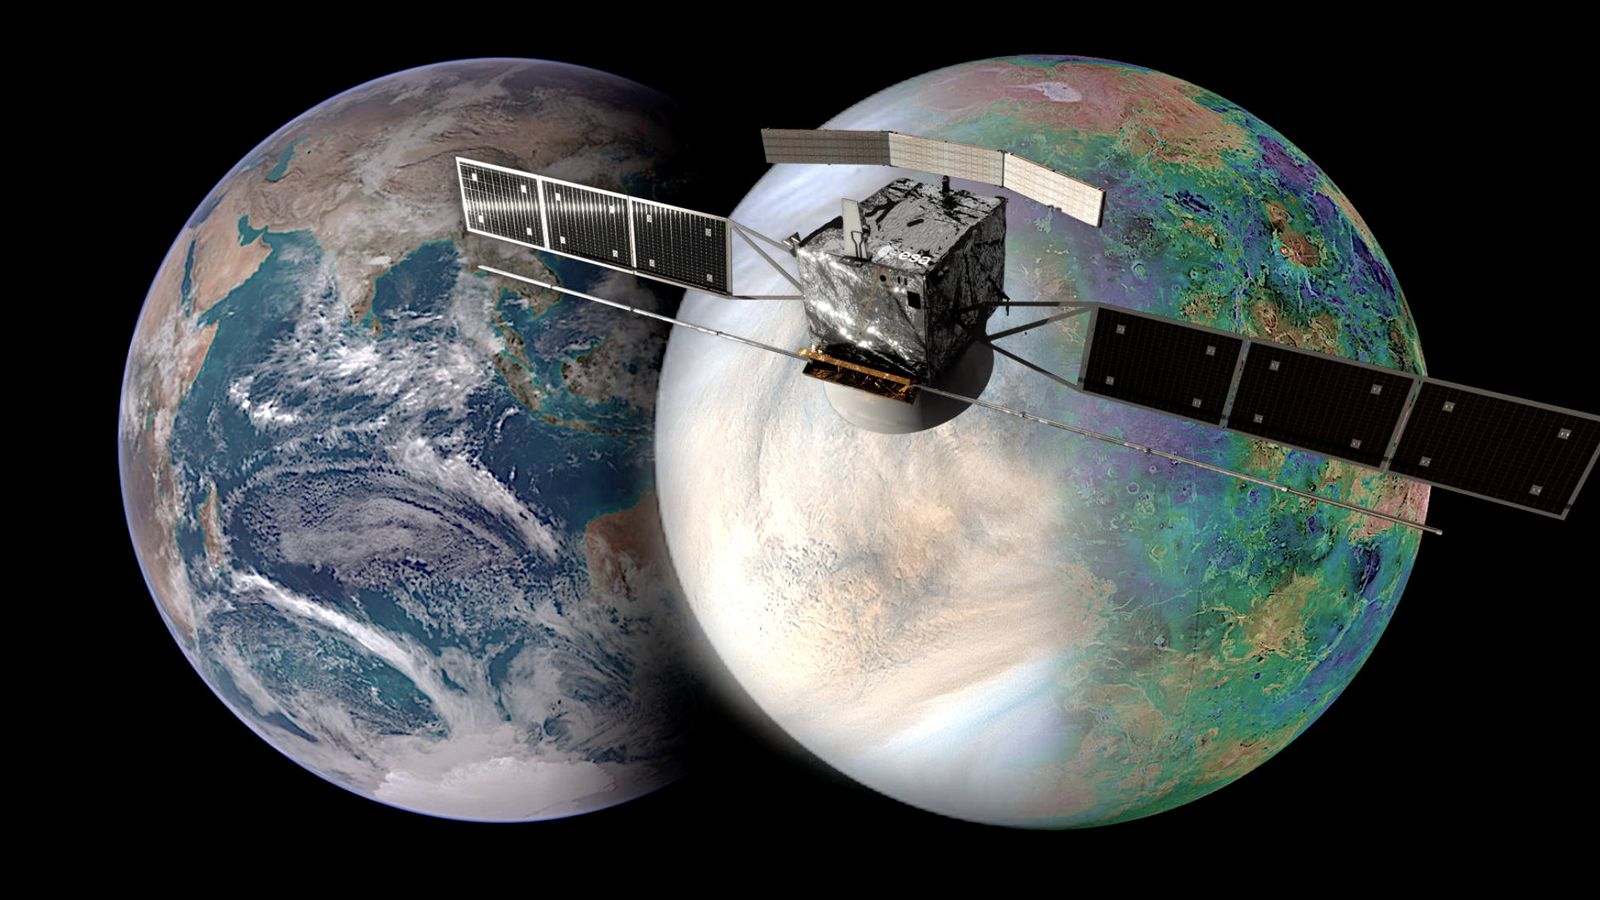 Venus: European Space Agency mission aims to unlock mysteries of ‘Earth’s twin’